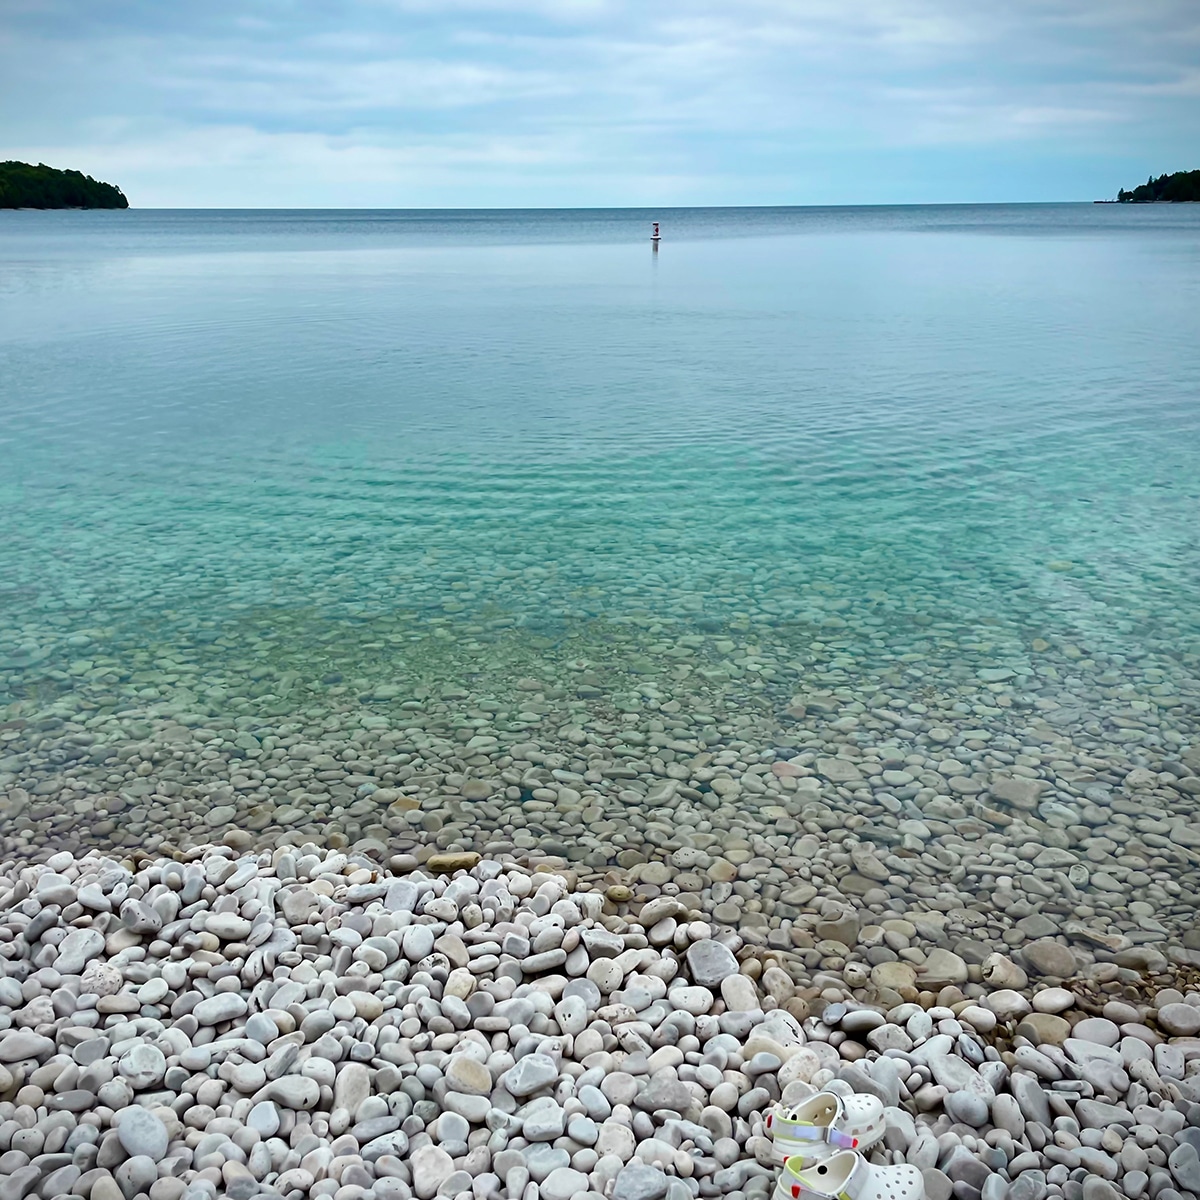 The smooth rocks and clear waters of Schoolhouse beach on Washington Island.